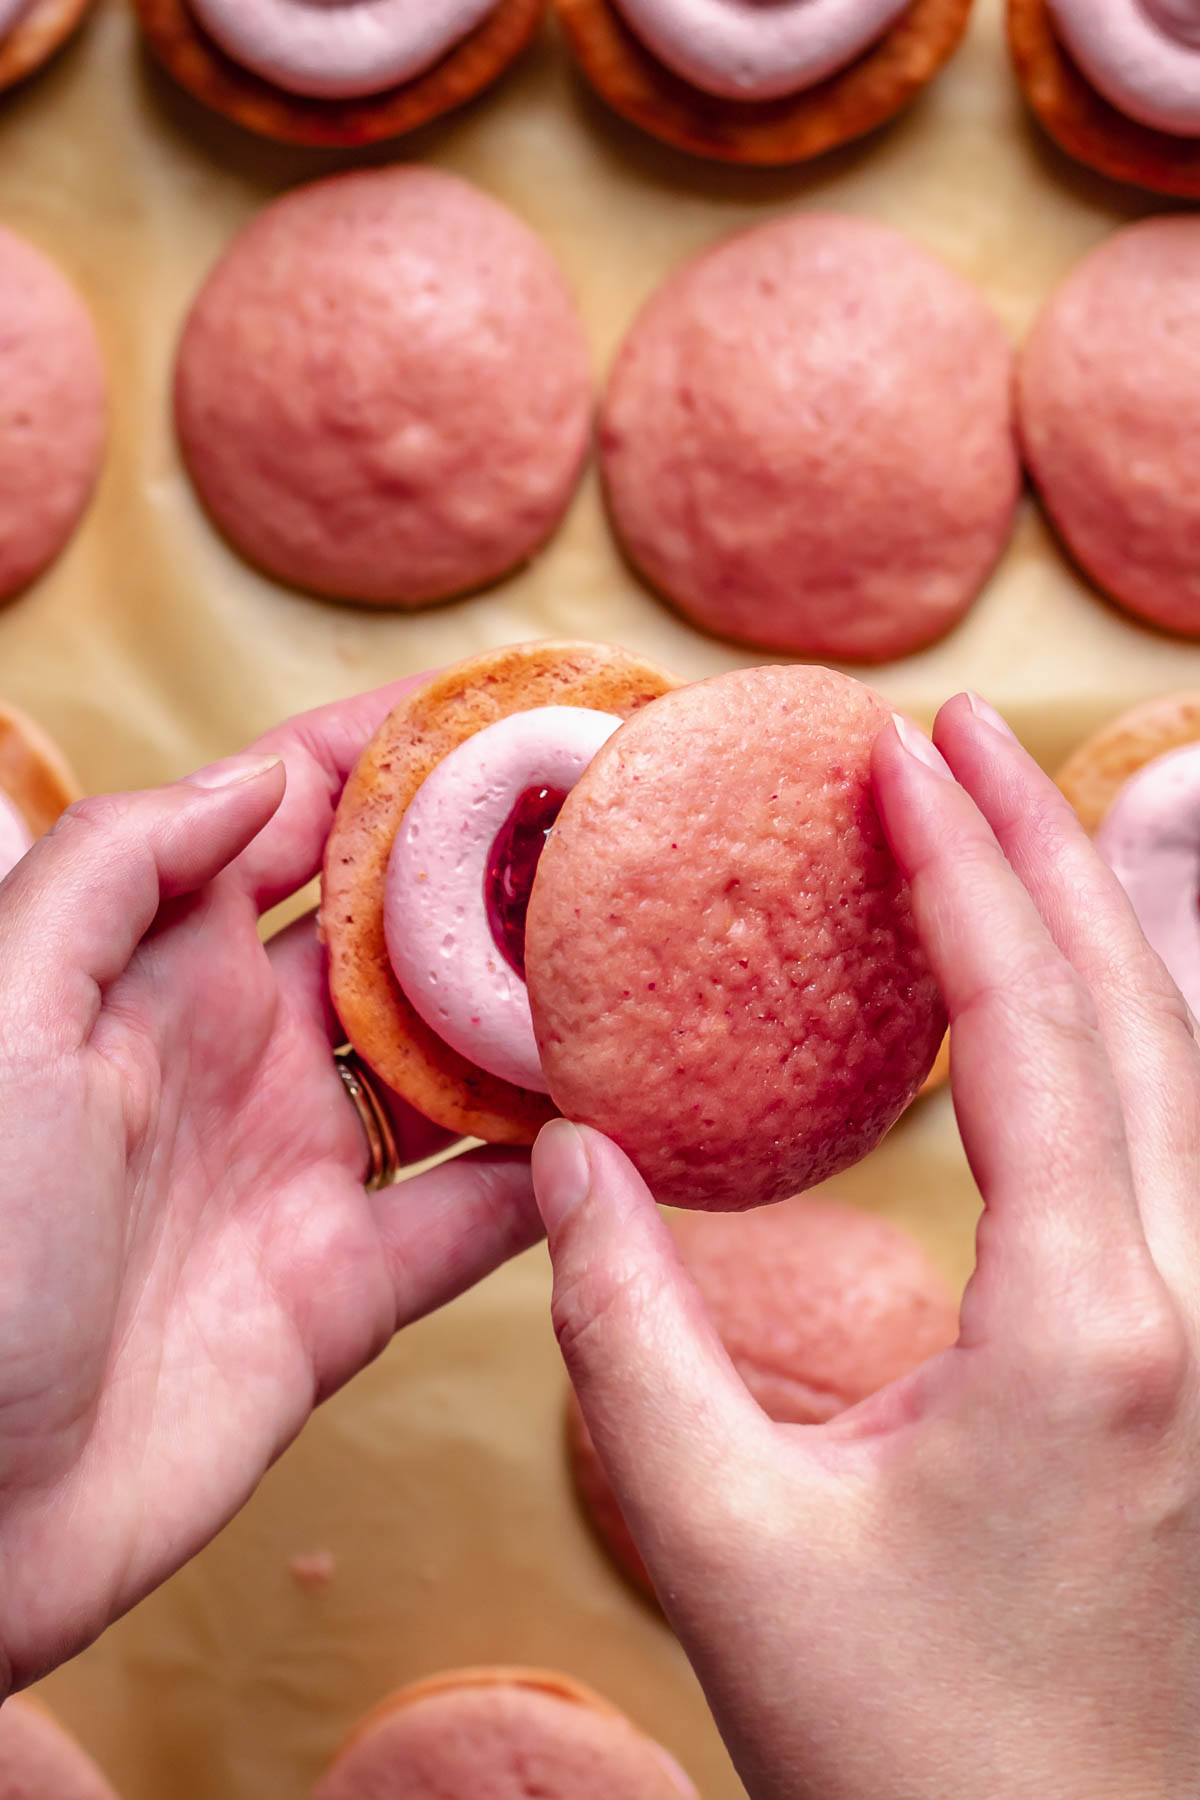 Hands close a strawberry whoopie pie.